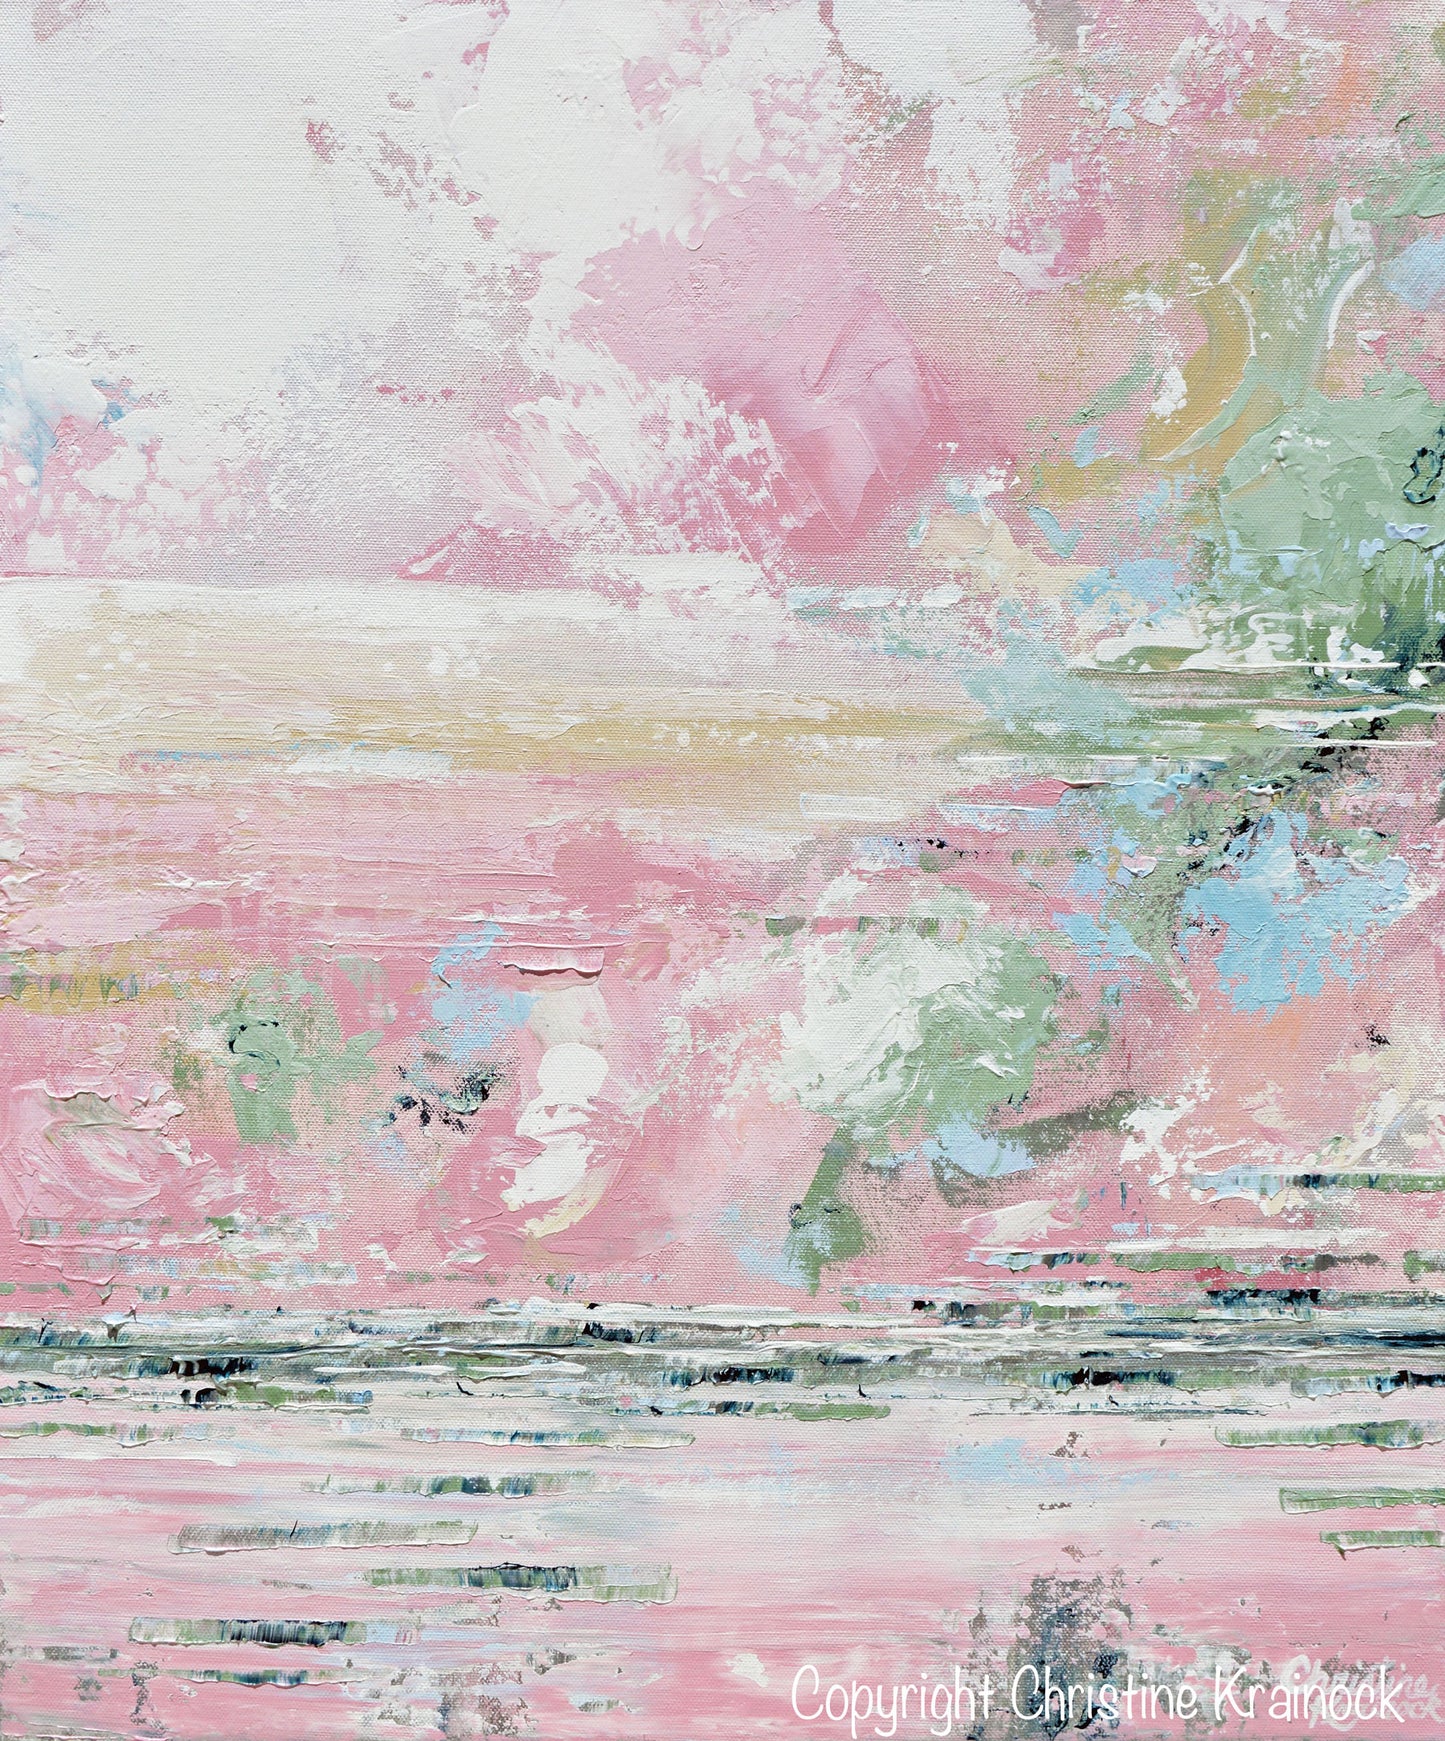 GICLEE PRINT Art Abstract Painting Pink White Grey Blue Coastal Canvas Wall Art Contemporary Home Decor